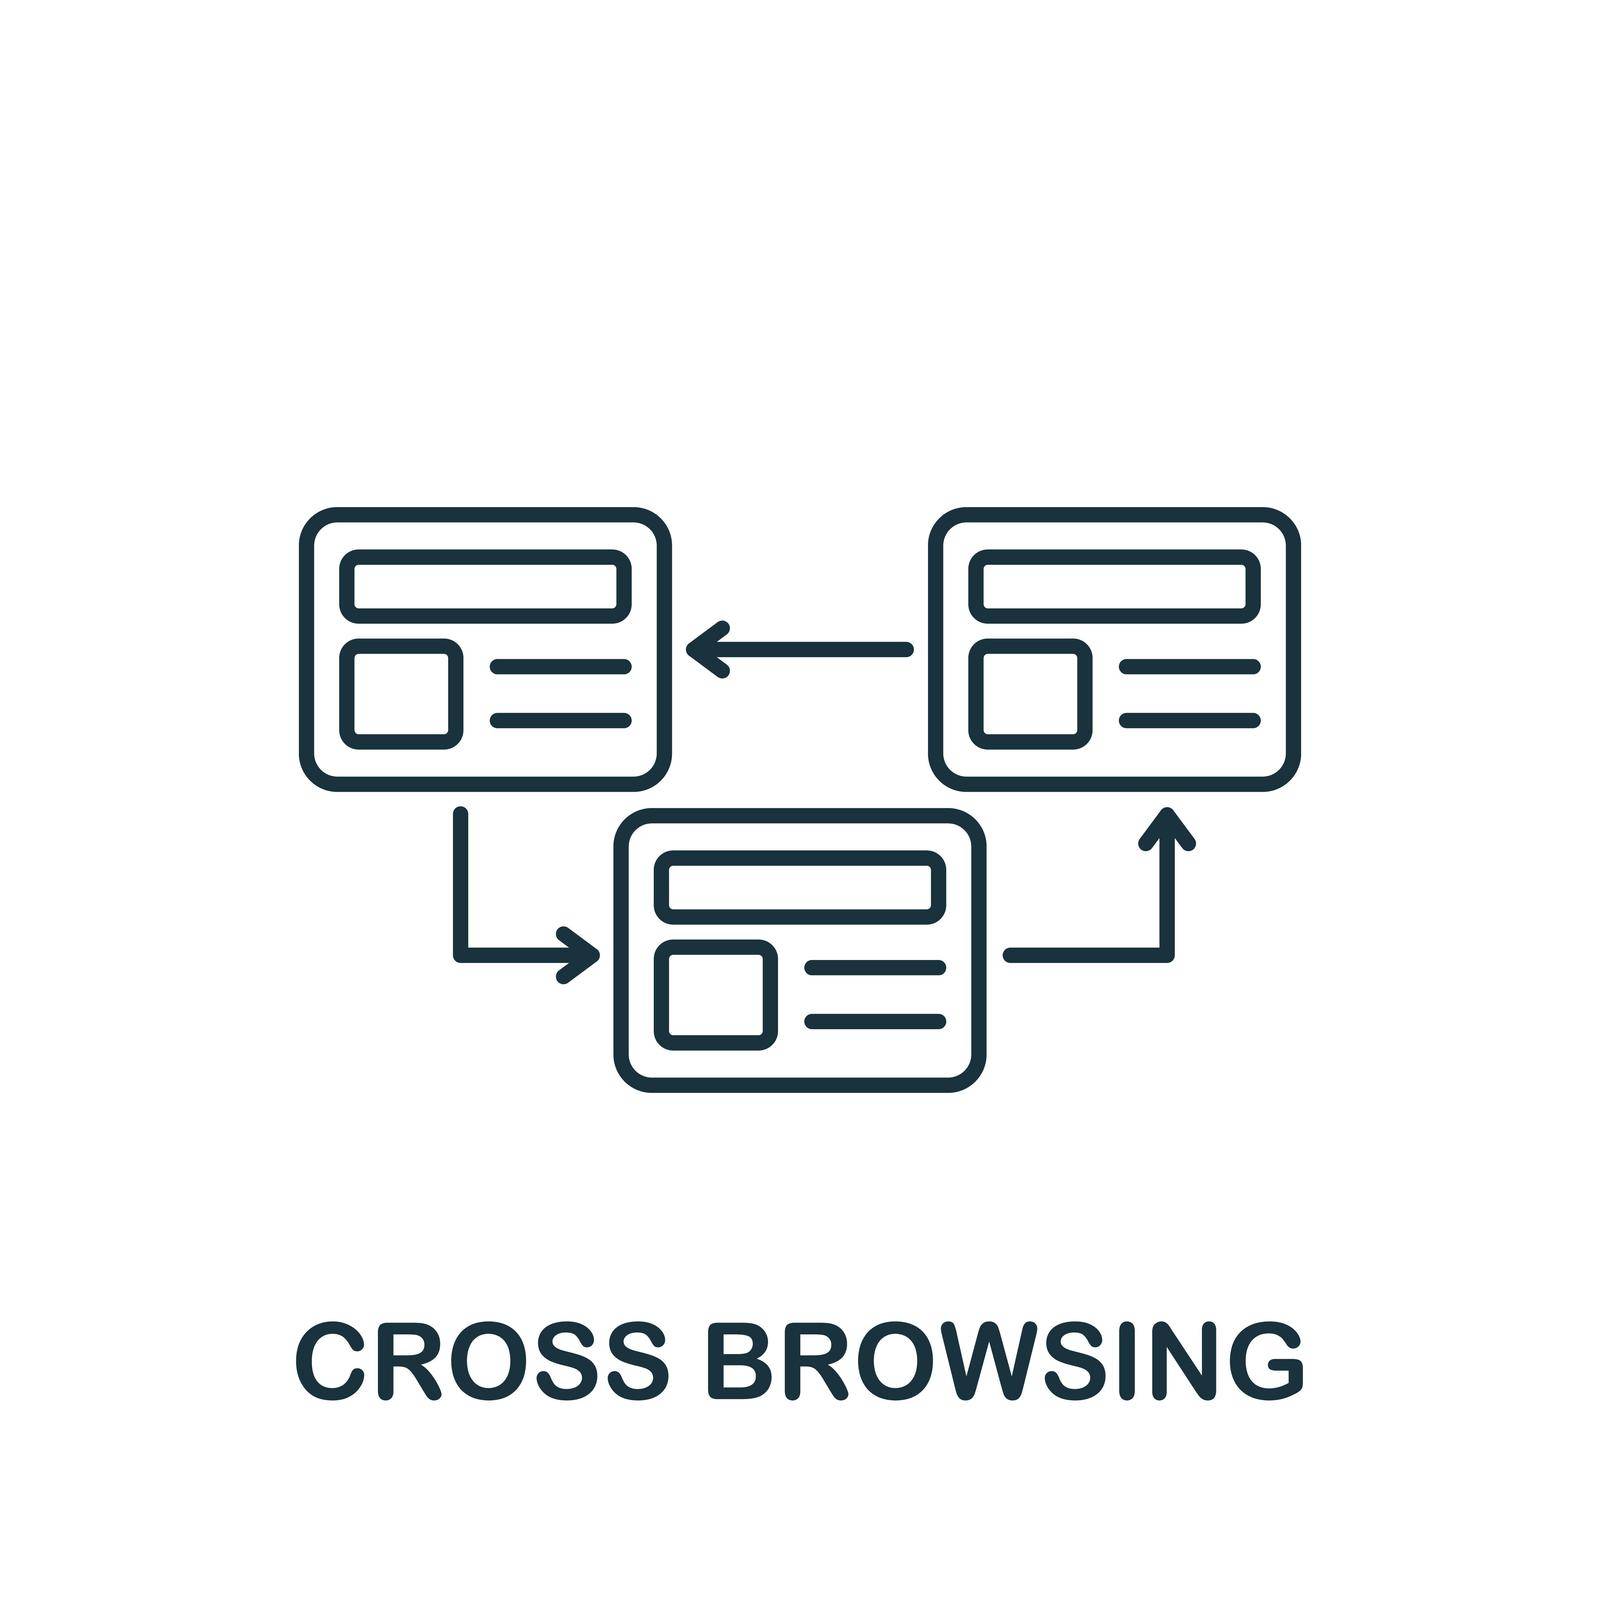 Cross Browsing icon. Line simple Web Development icon for templates, web design and infographics by simakovavector